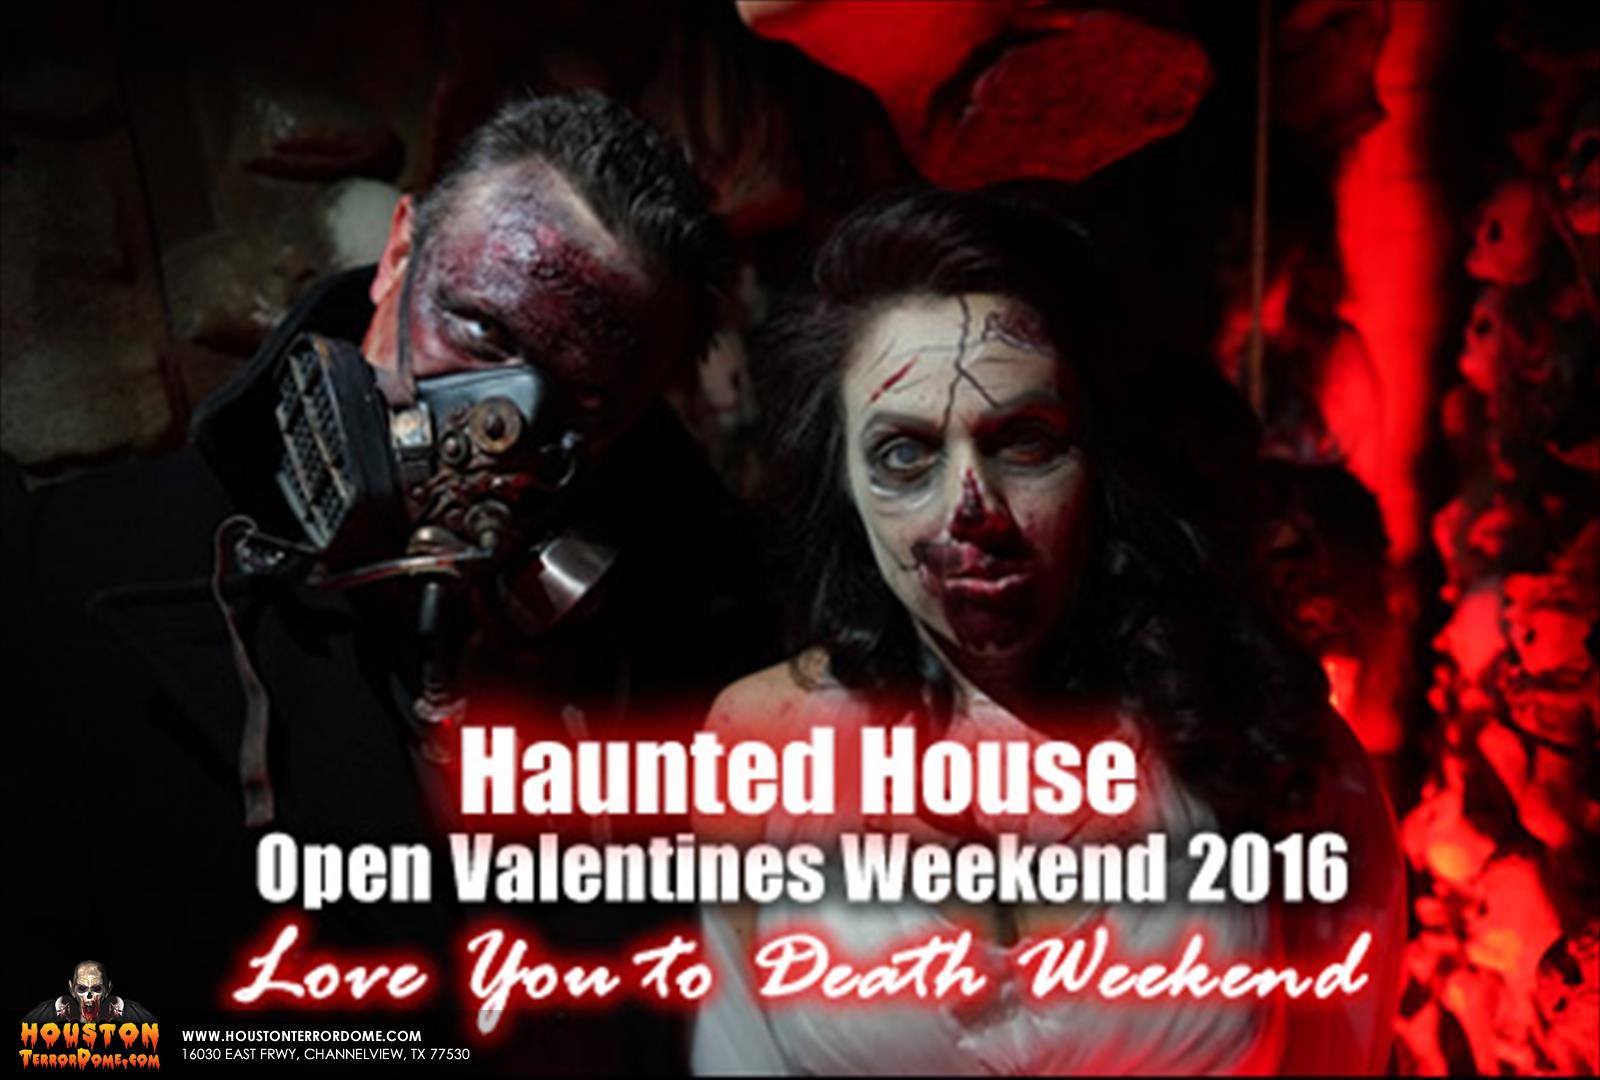 Valentines Weekend Friday at the Haunt